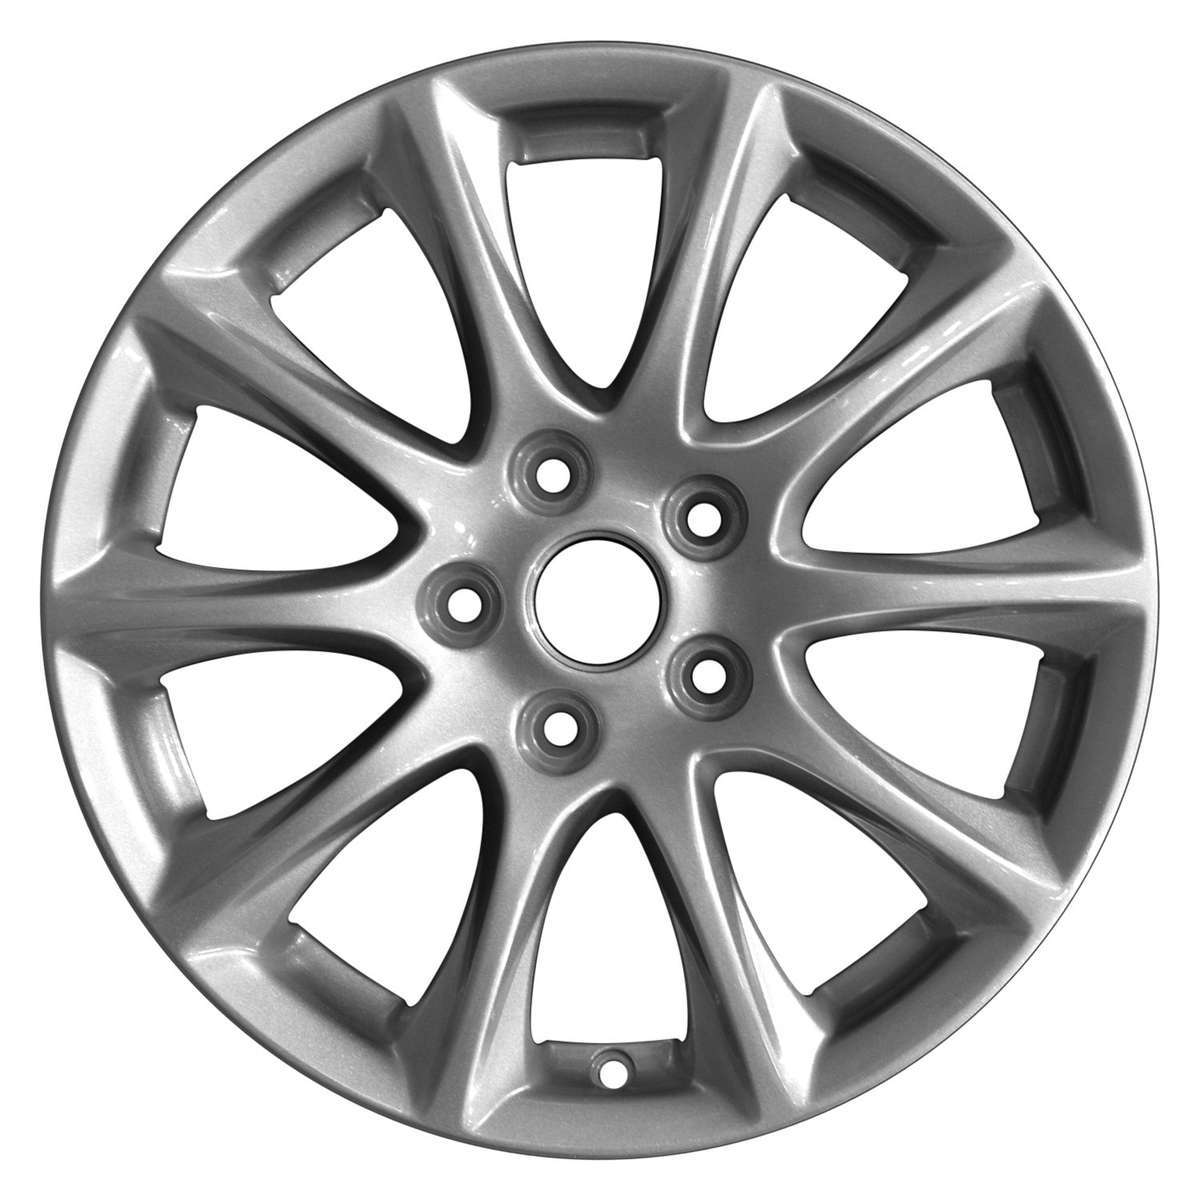 2018 Ford Fusion New 16" Replacement Wheel Rim RW3983S